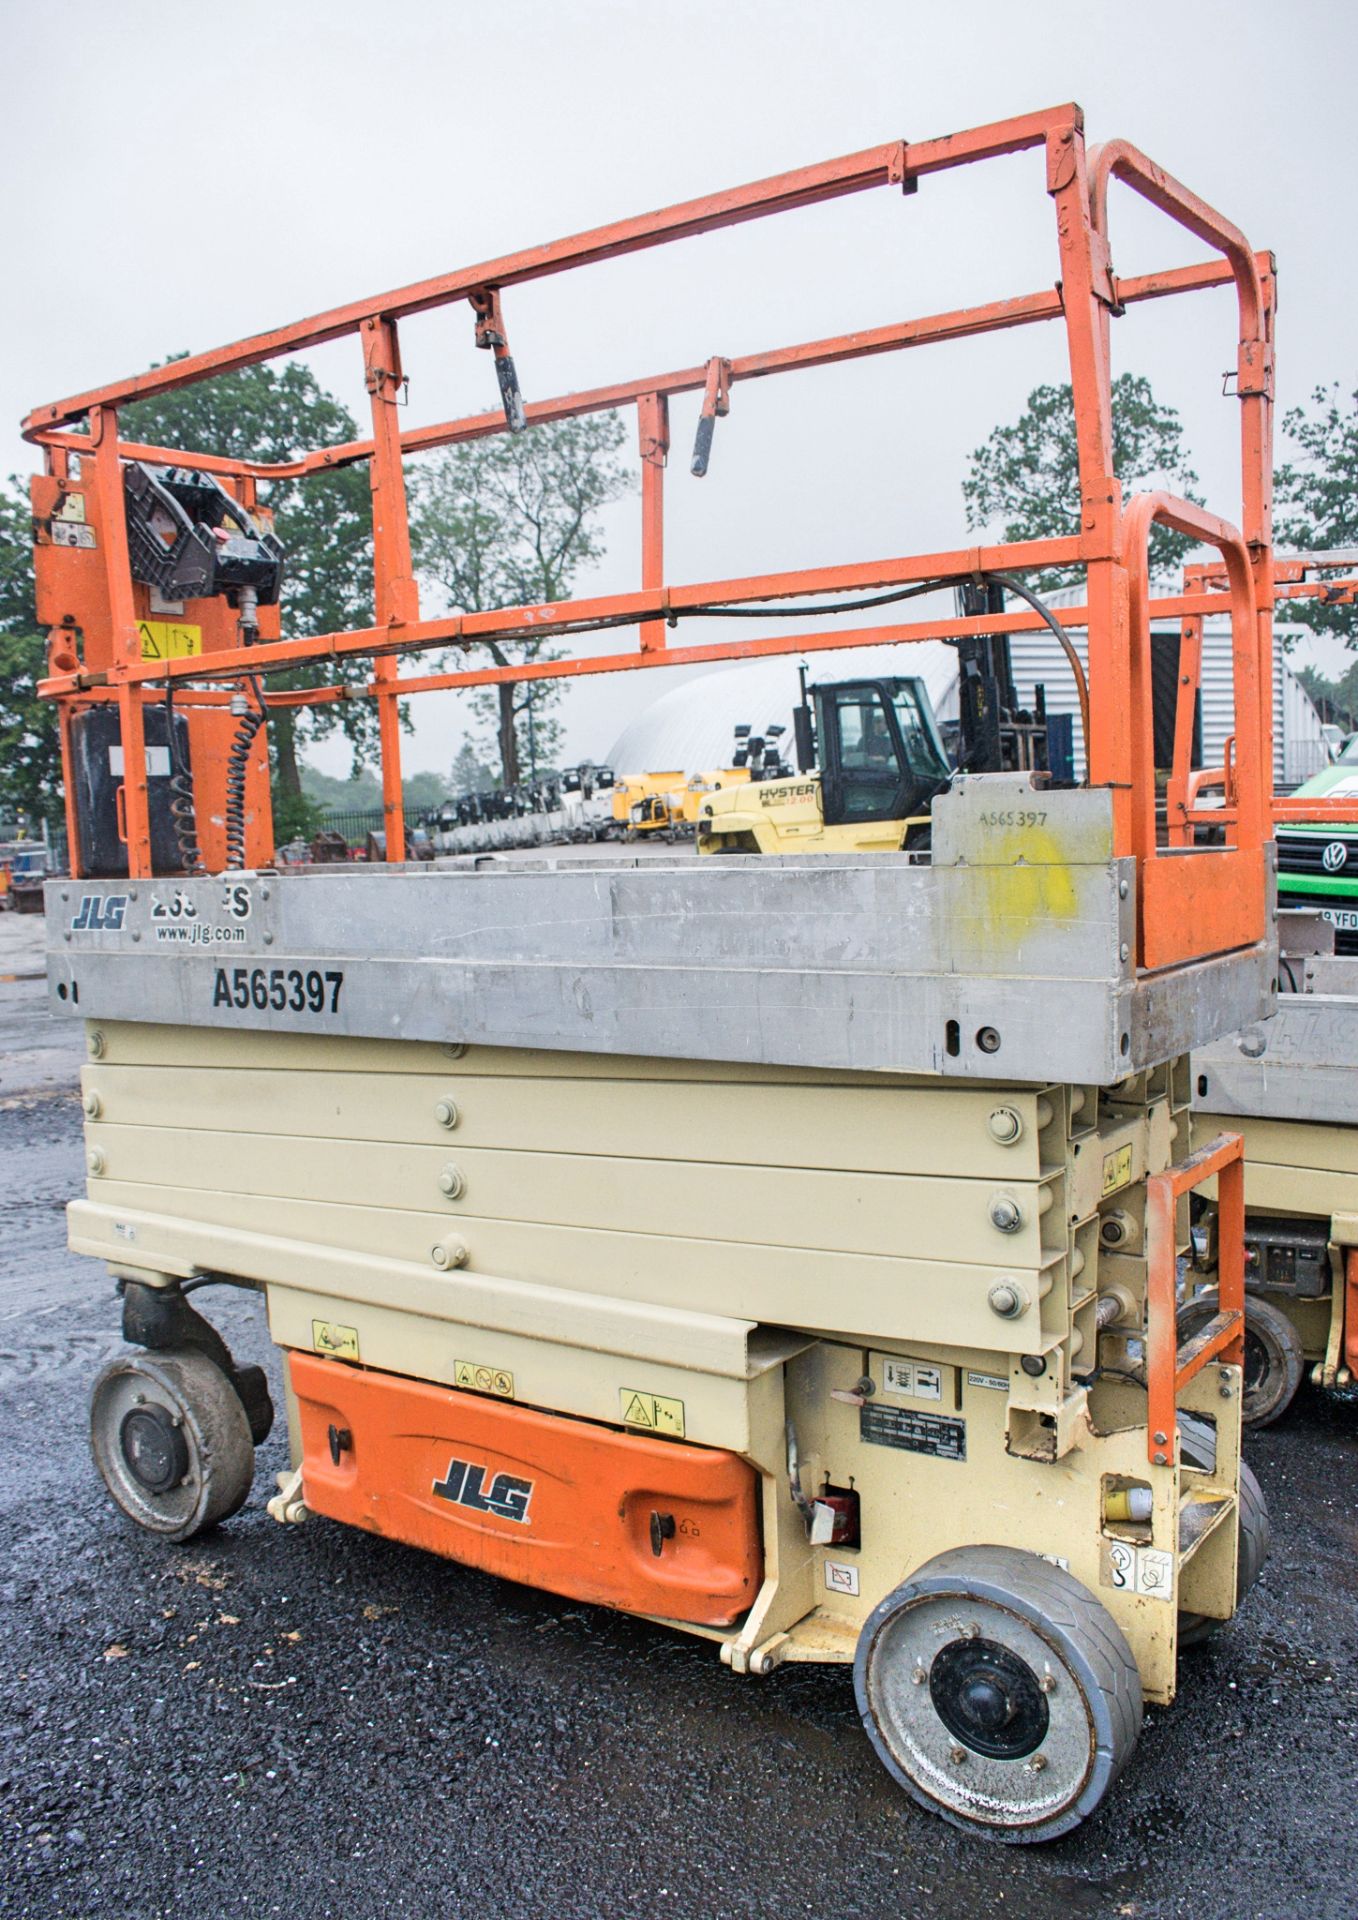 JLG 2630ES battery electric scissor lift Year: 2011 S/N: 1931 Recorded Hours: 329 A565397 - Image 2 of 9